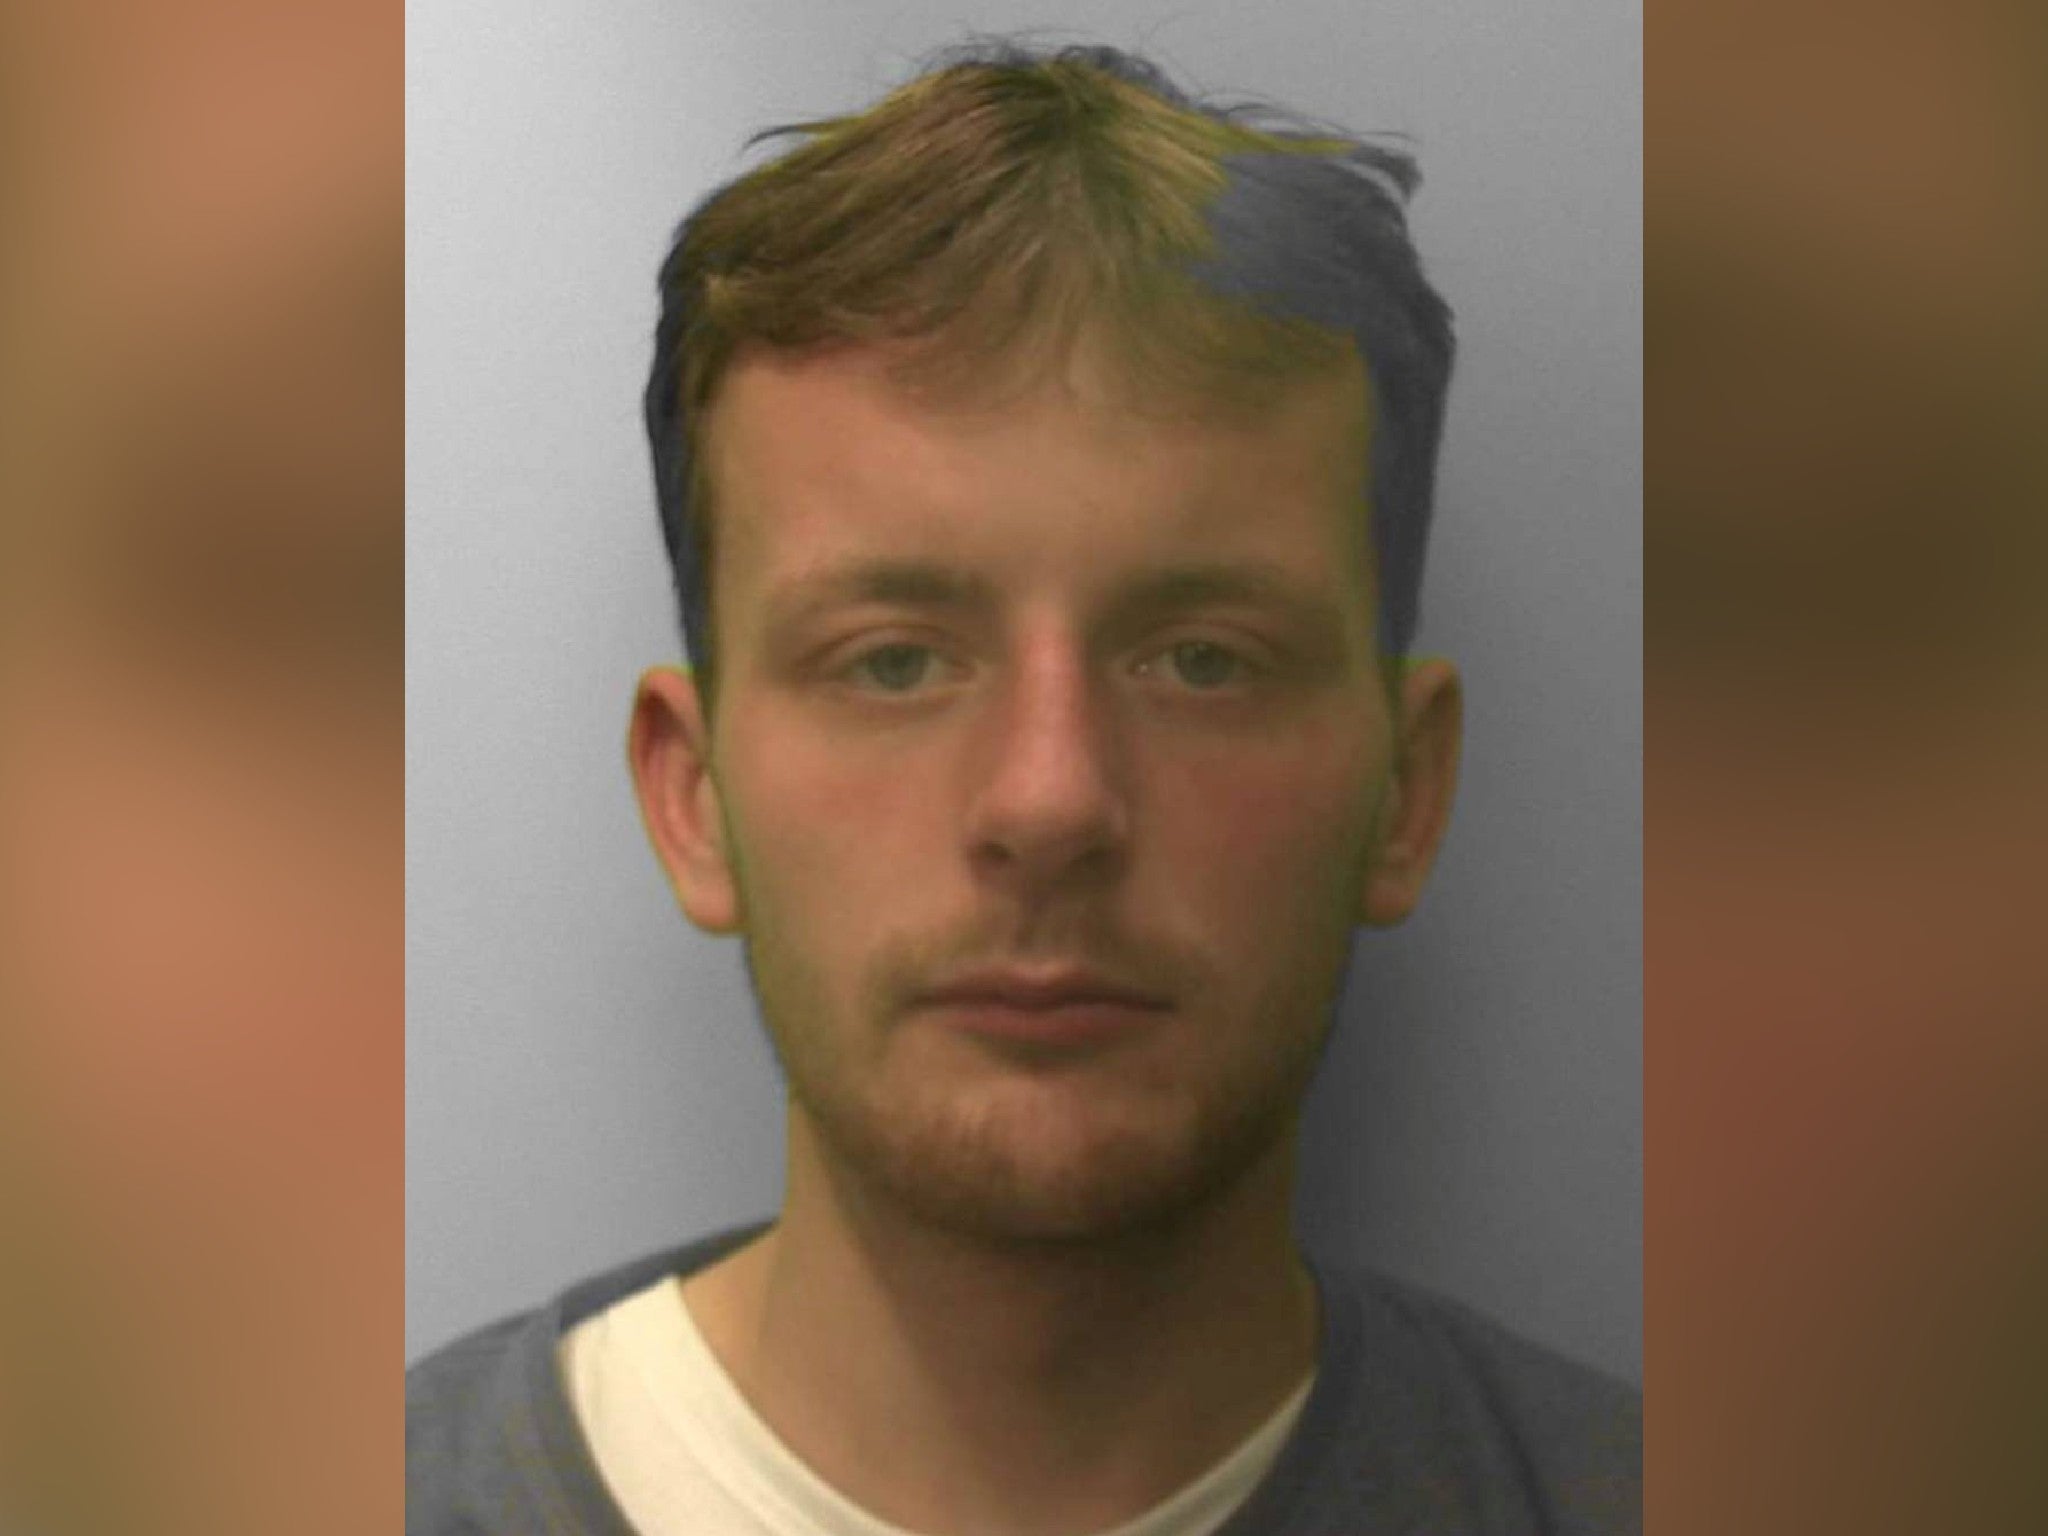 Jake Finn, 22, w as jailed for 26 weeks at Brighton Magistrates’ Court